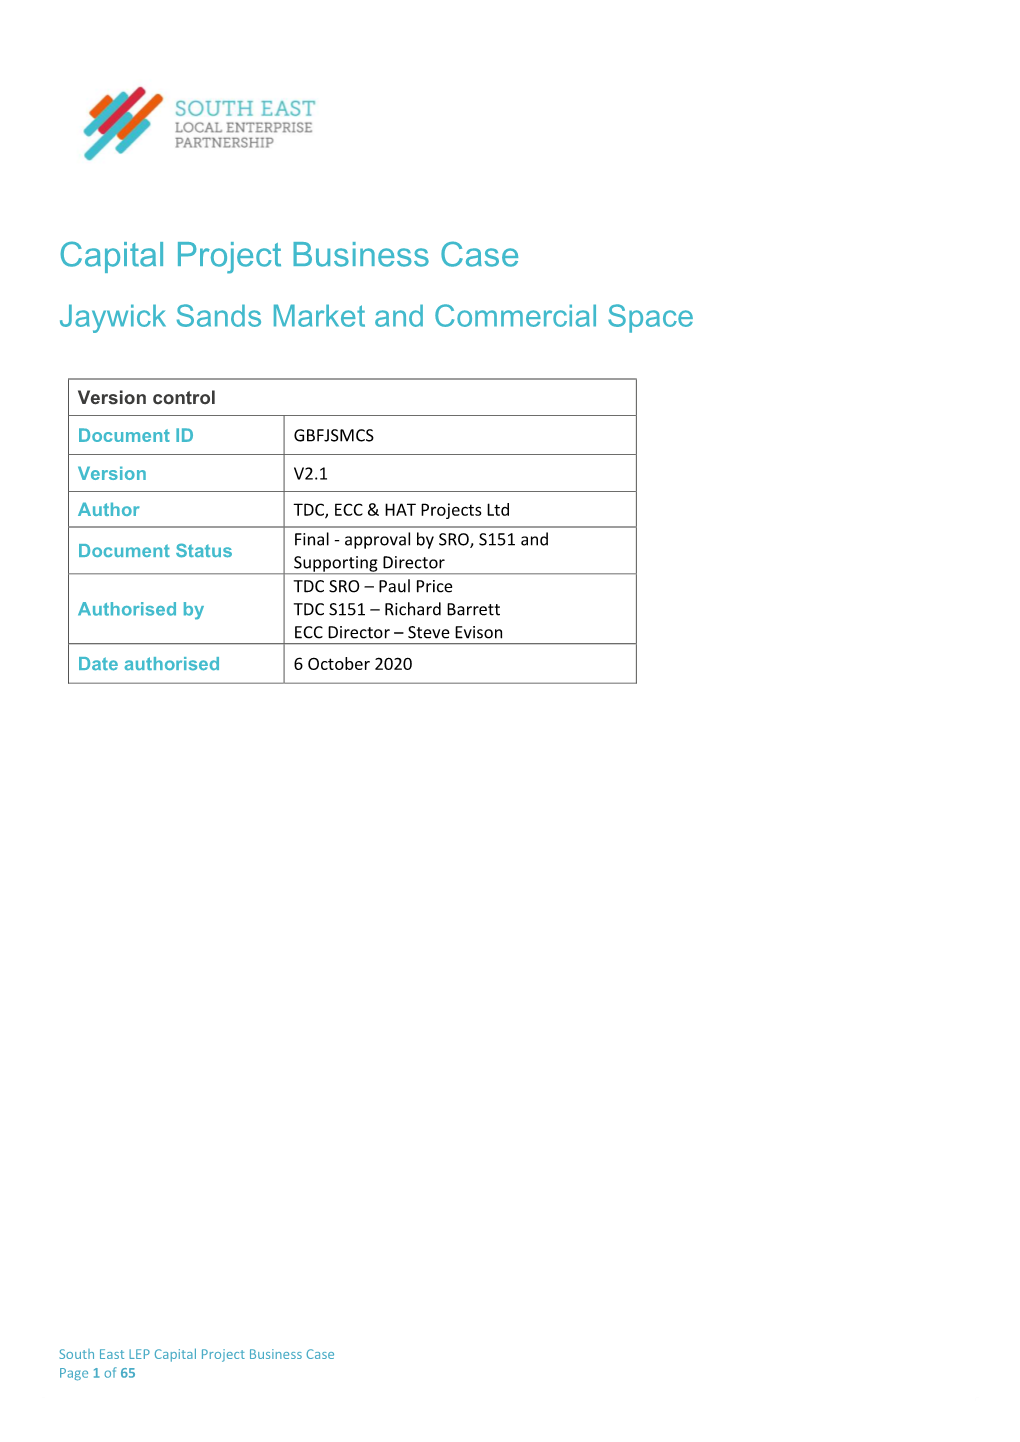 Jaywick Sands Market and Commercial Space Business Case